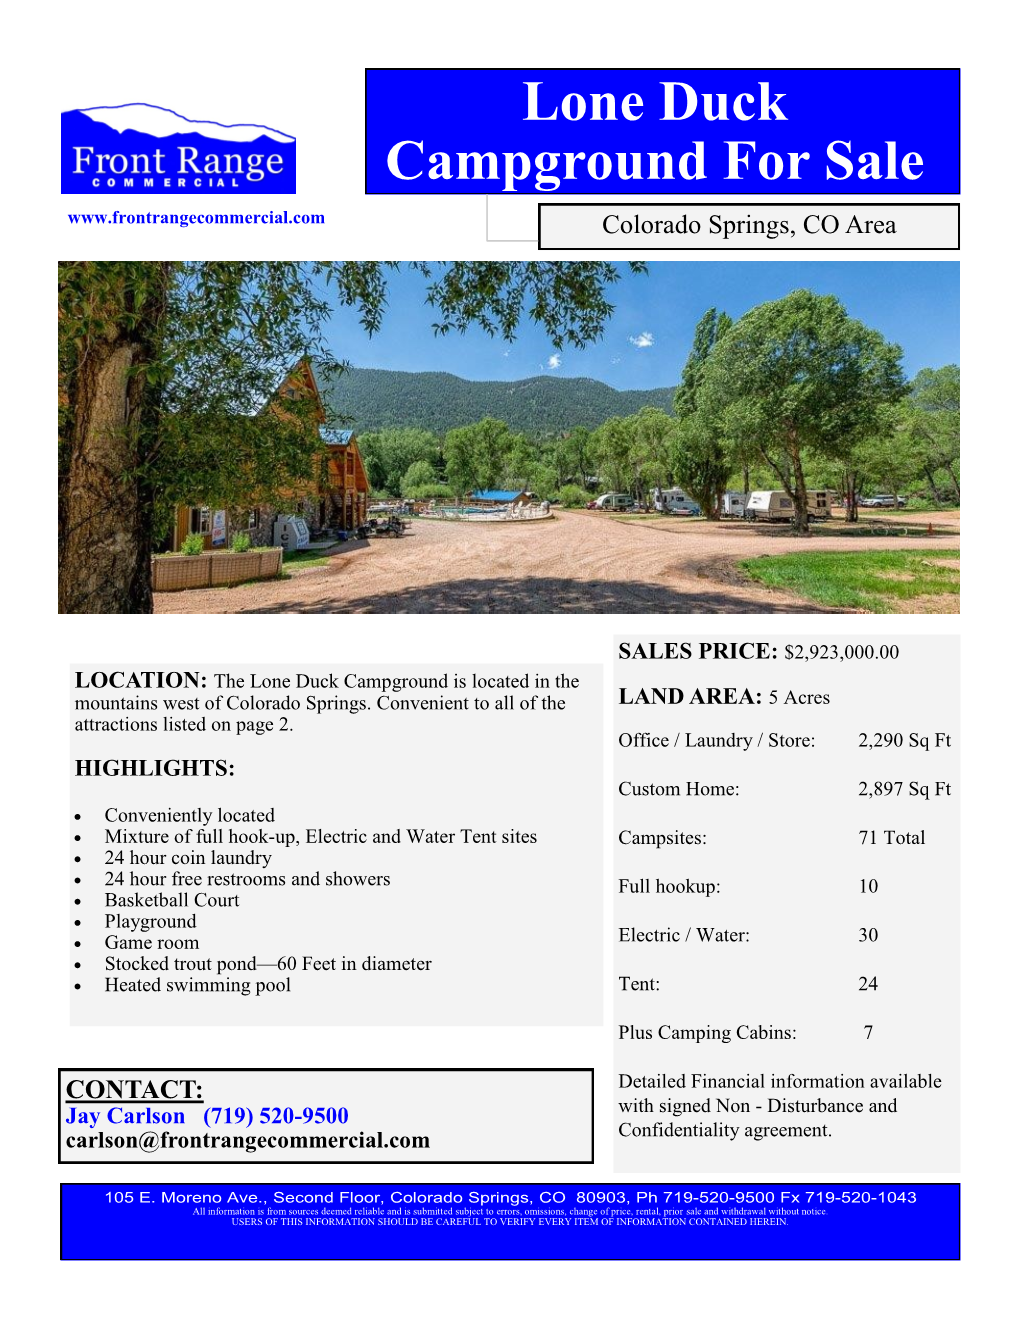 Lone Duck Campground for Sale Colorado Springs, CO Area